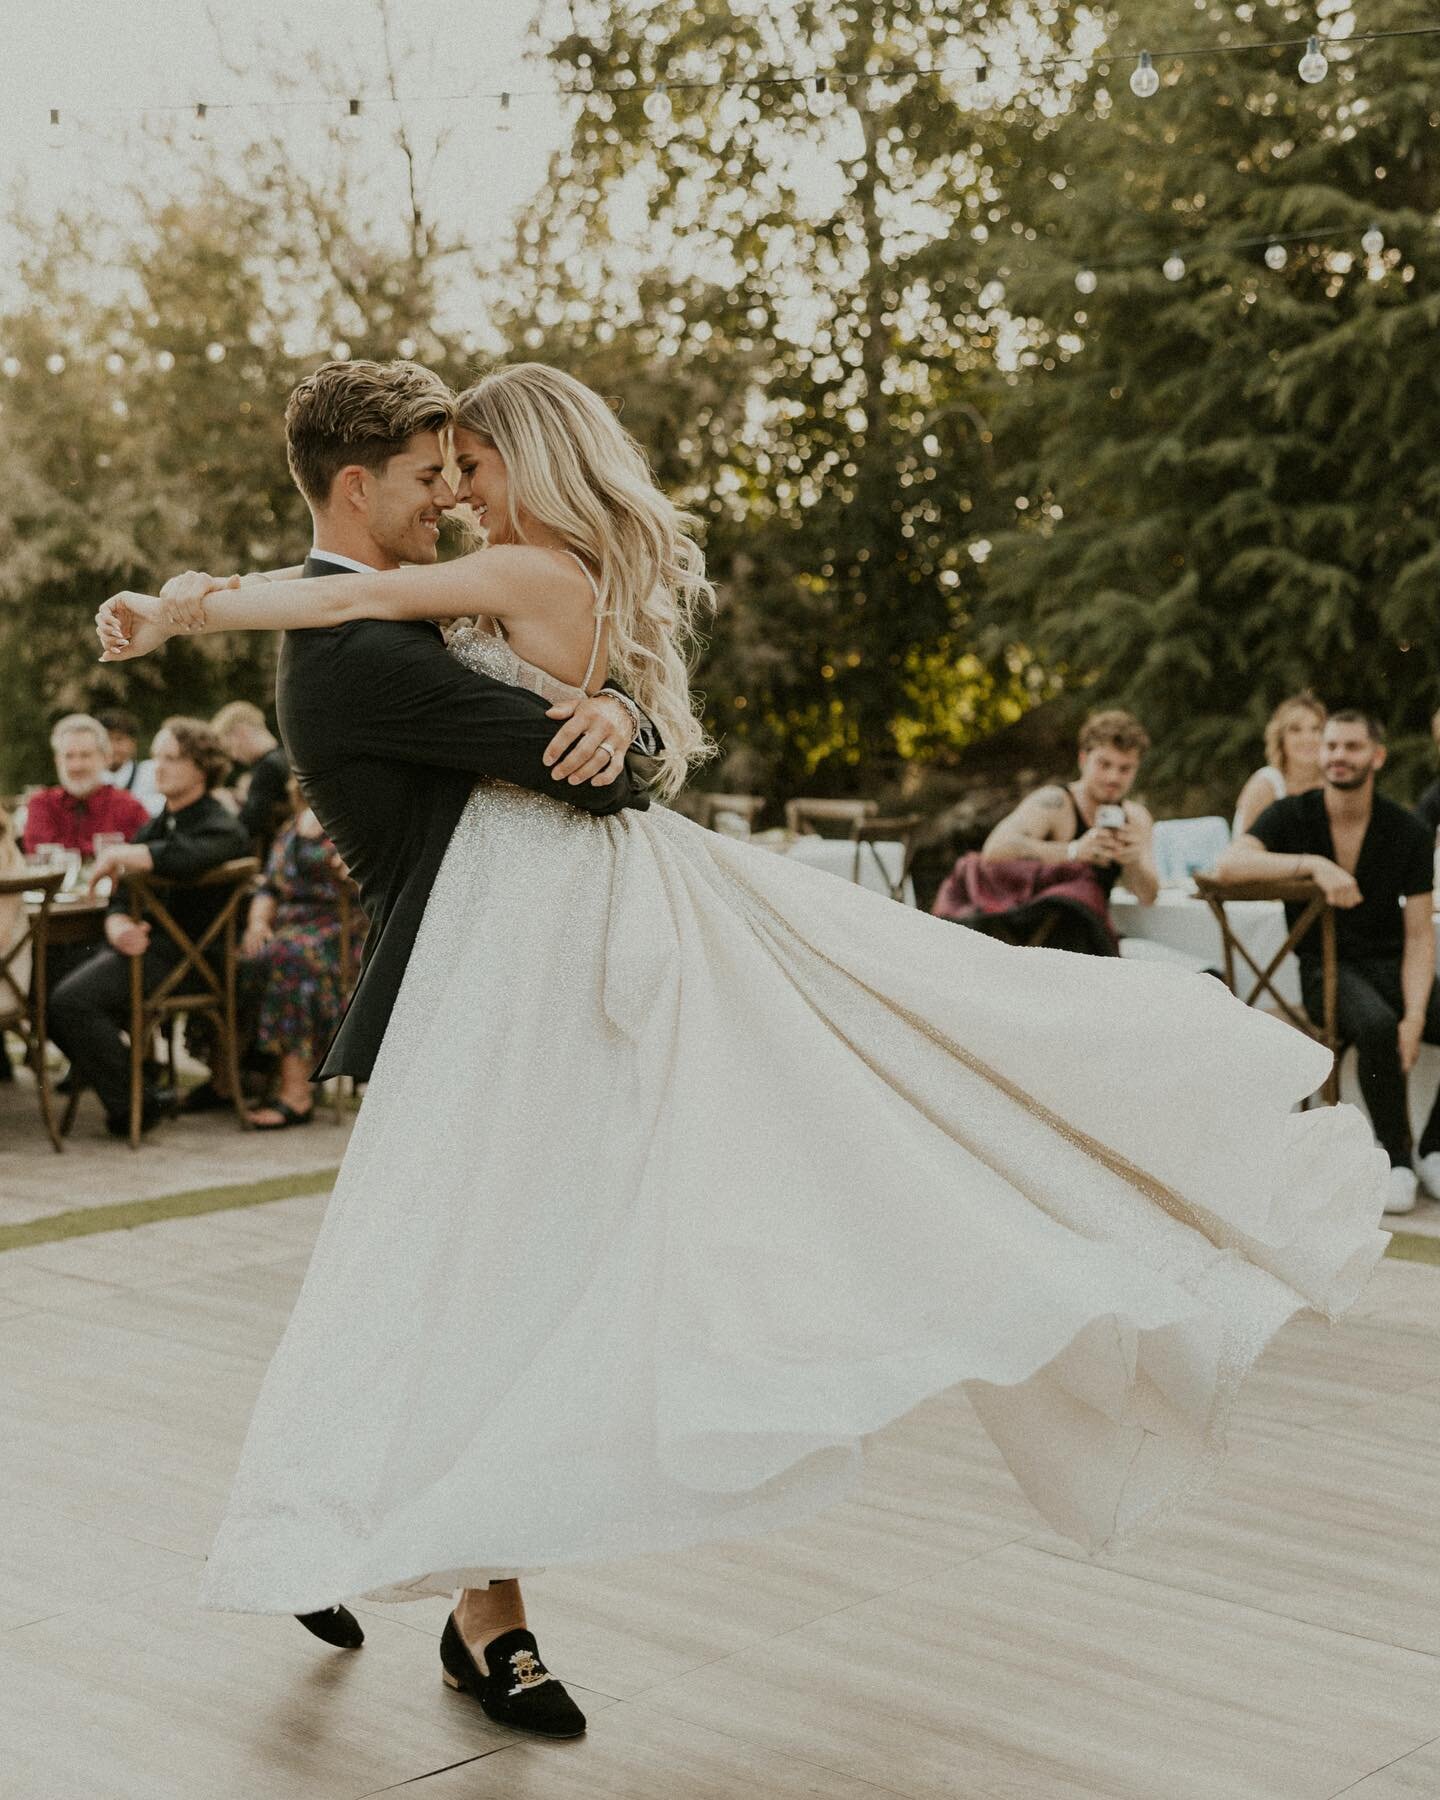 Picture perfect moment for the picture perfect couple. 

Couple: @iamkelianne @chasemattson 
Planning | Event Styling: @livelovecreate, @christineschang
Venue: @serendipity_weddings
Photographer: @madisonemilyharephoto
Makeup: @alyssamarie.beauty
Hai